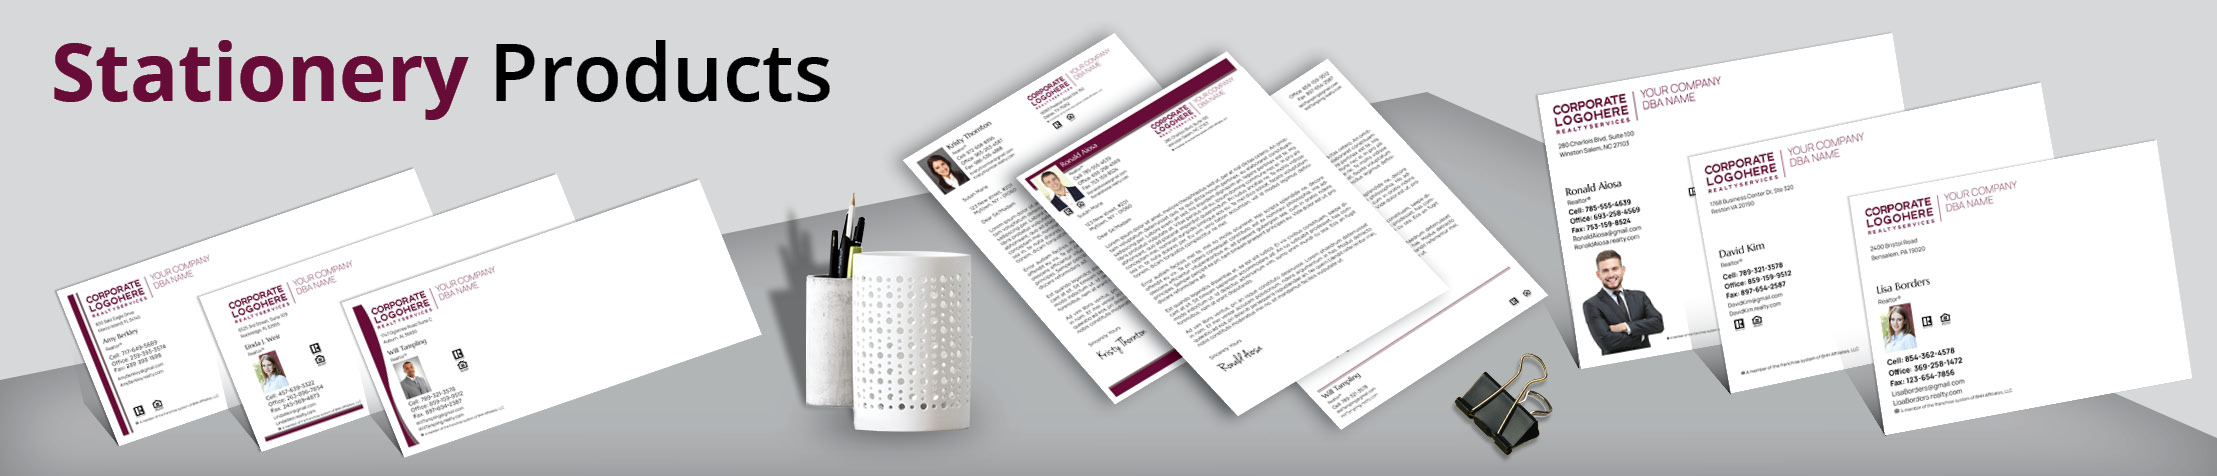 Berkshire Hathaway Real Estate Stationery Products - - Custom Letterhead & Envelopes Stationery Products for Realtors | BestPrintBuy.com